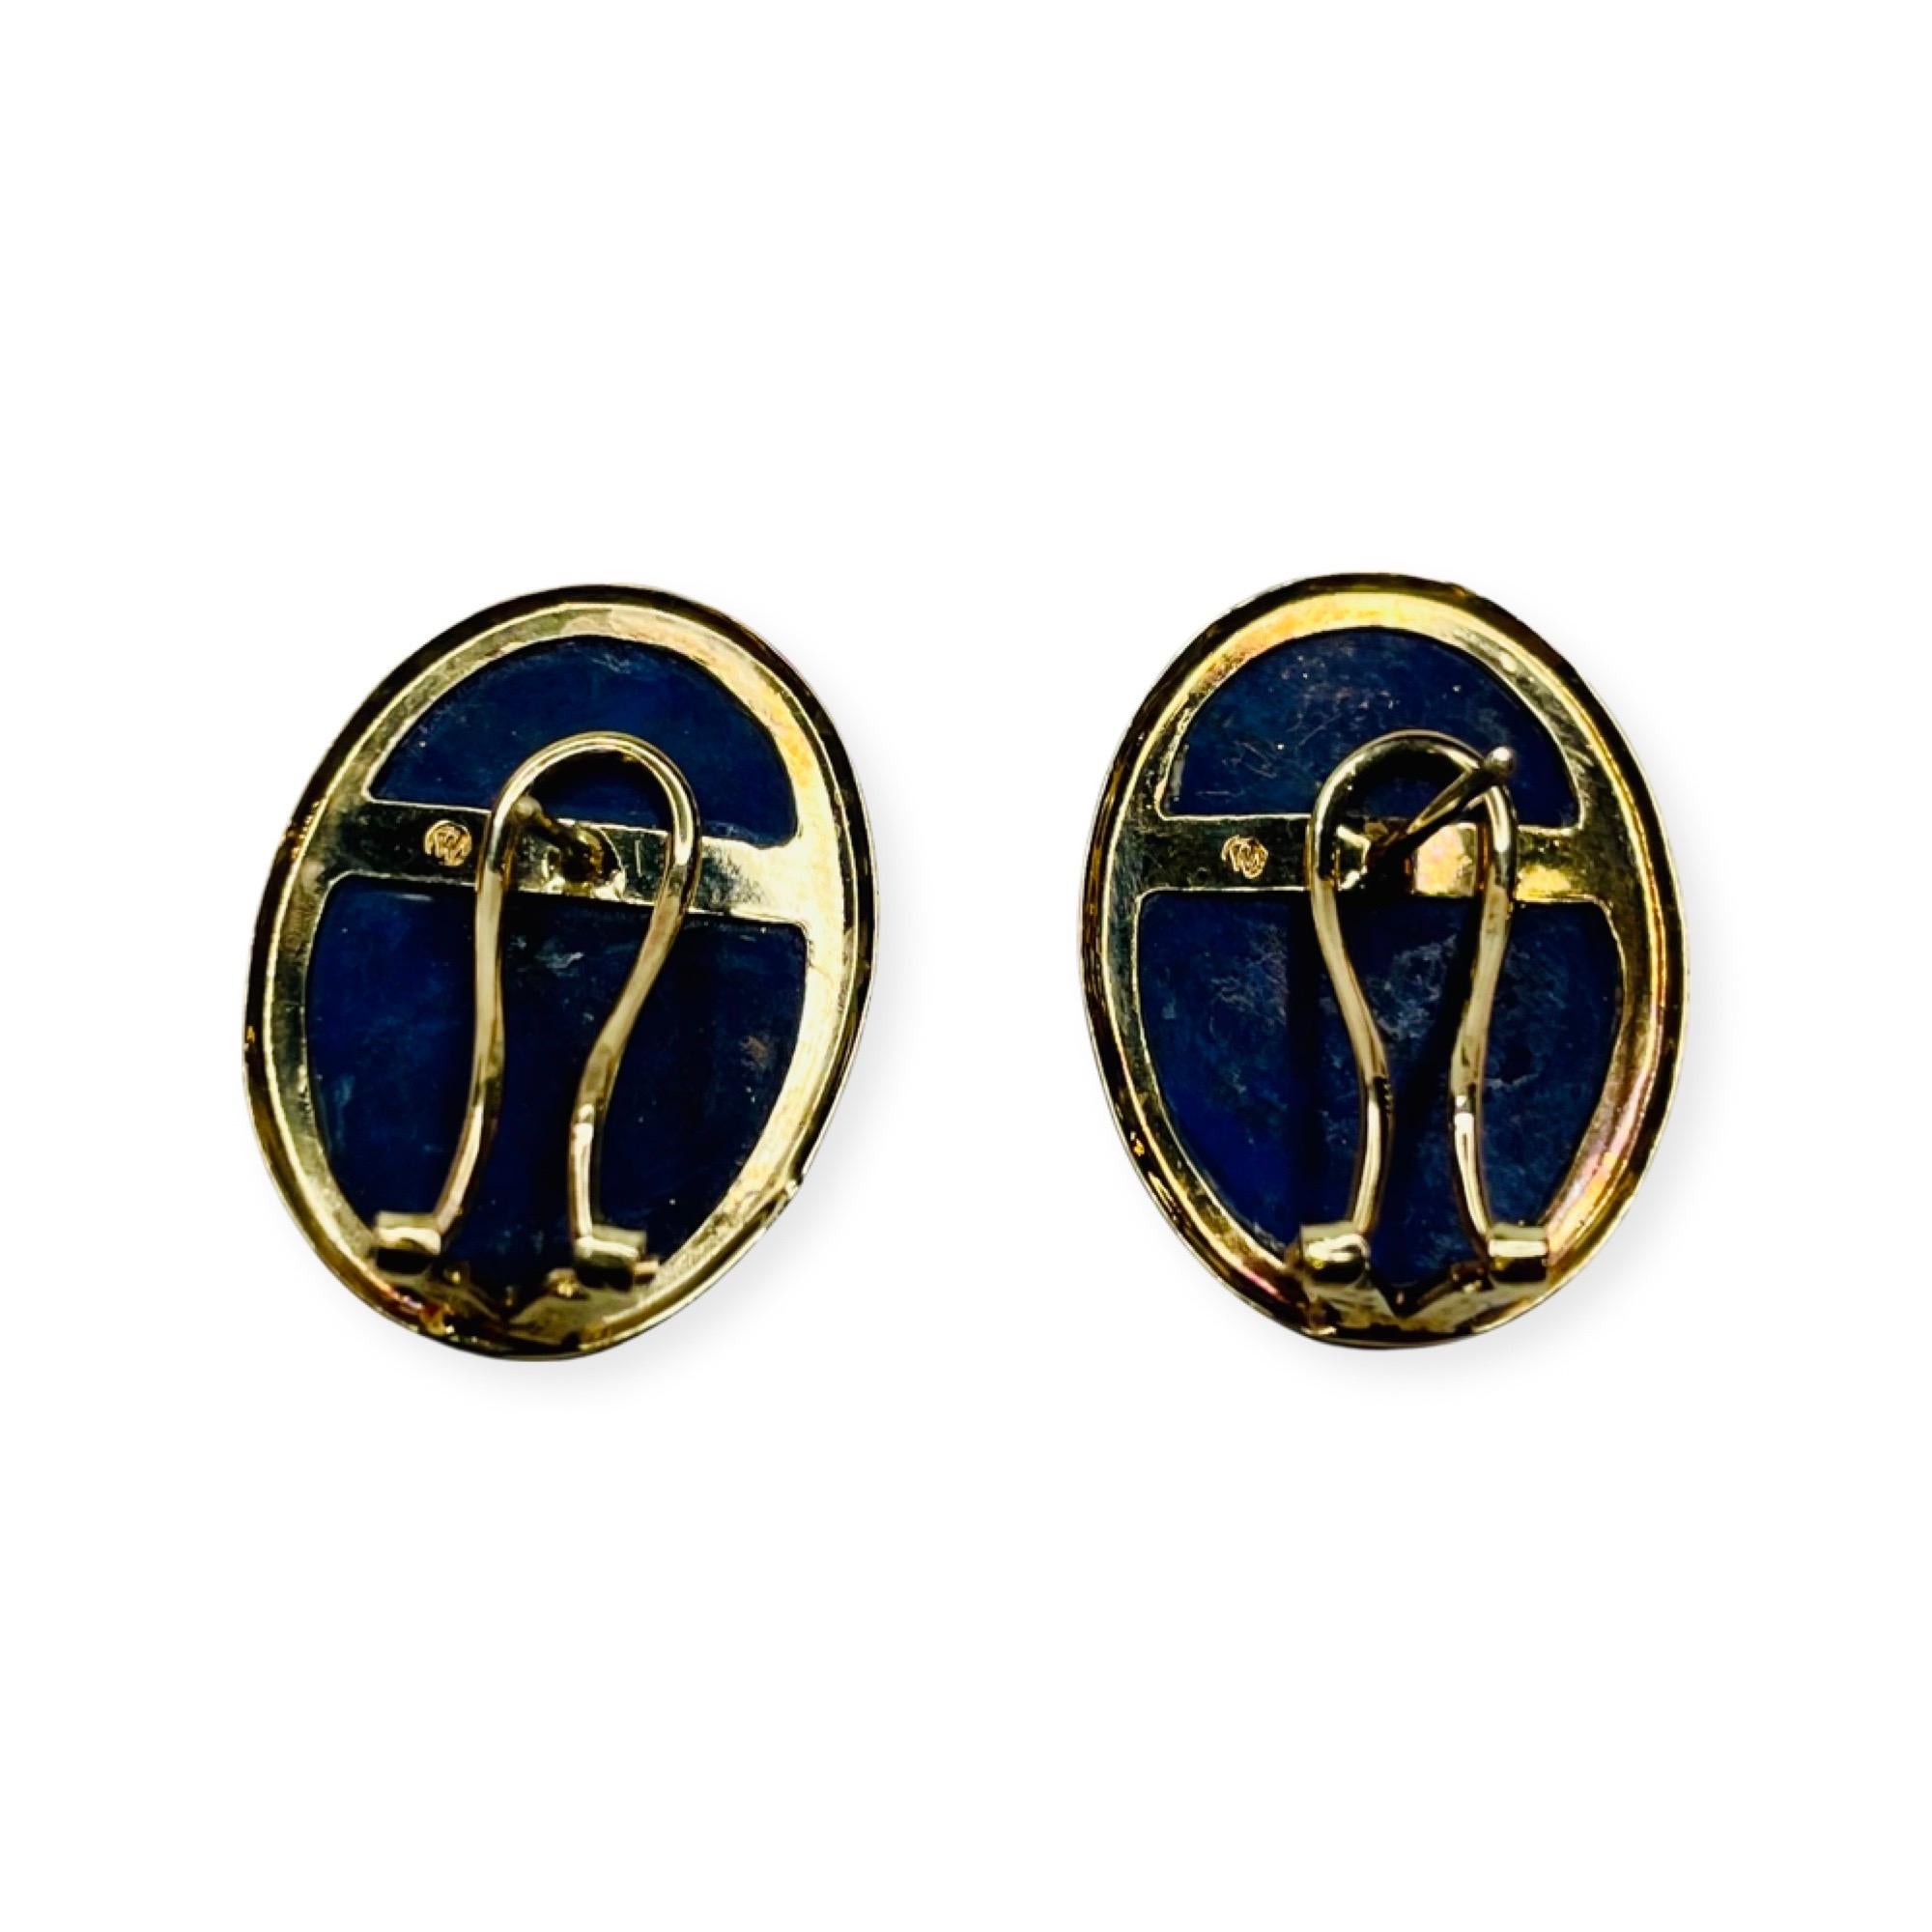 Okada 14K Yellow Gold Natural Lapis Earrings. There are 2 - 18.0 mm x 13.0 mm natural Lapis cabochons, bezel set.The earrings have omega backs. 
400-70-348